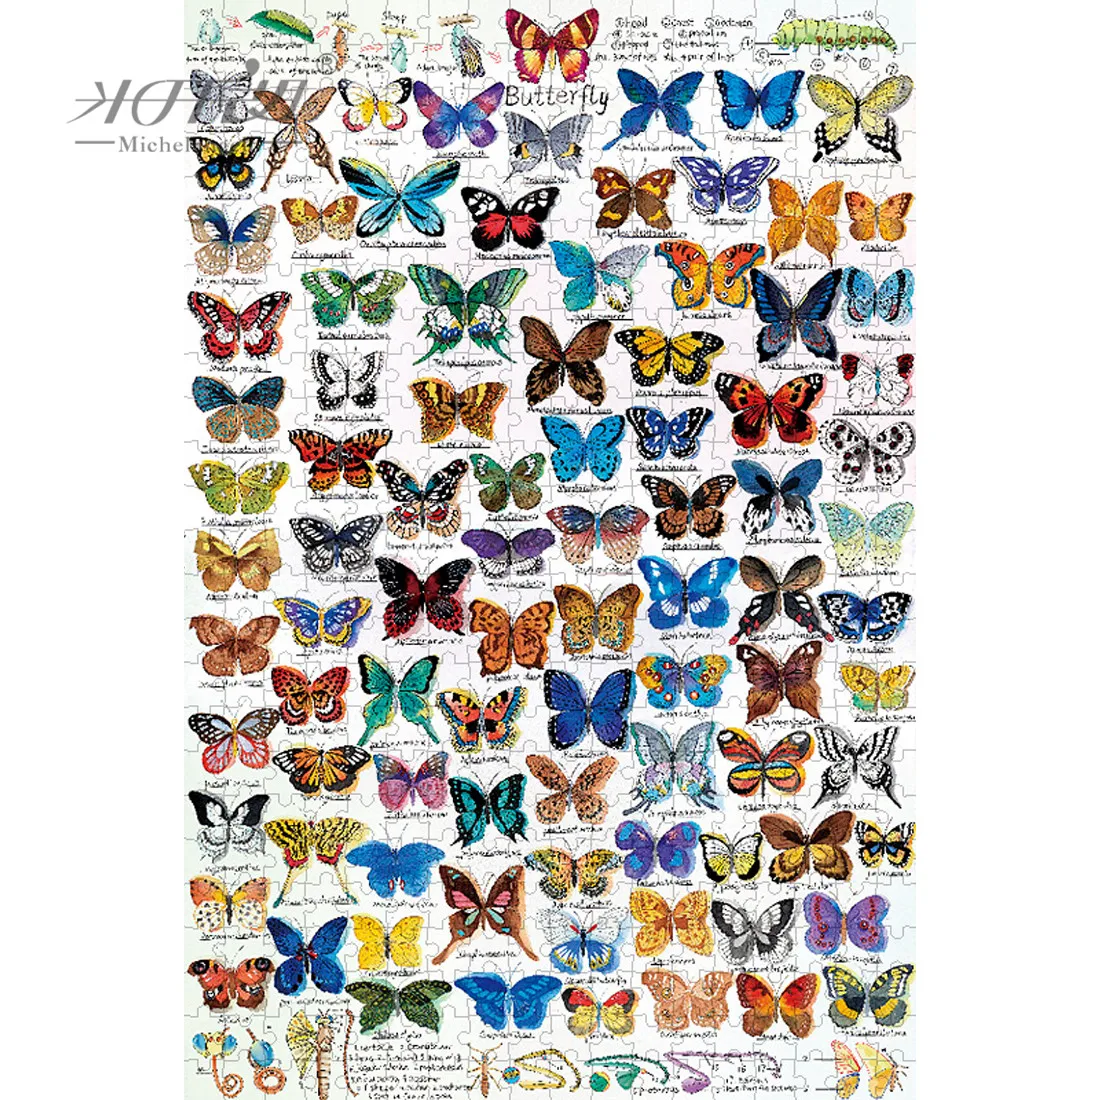 Michelangelo Wooden Jigsaw Puzzle 500 1000 1500 Piece Butterfly Map Cartoon Animal Kid Educational Toy Watercolor Painting Decor